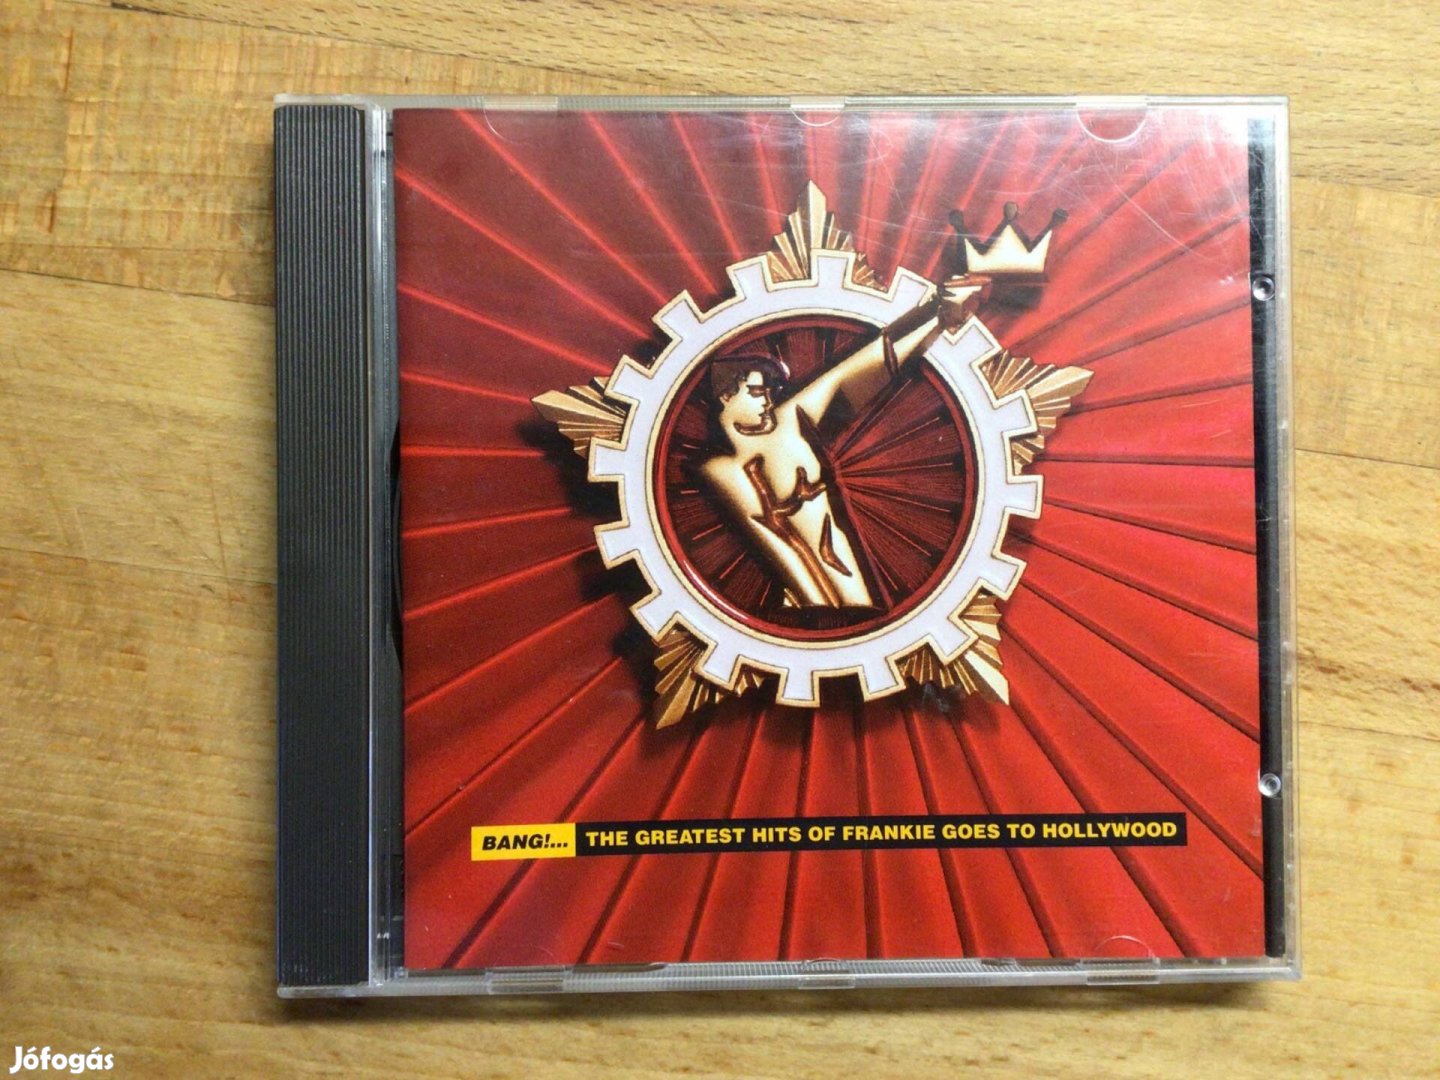 Bang! The Greatest Hits Of Frankie Goes To Hollywood, cd lemez